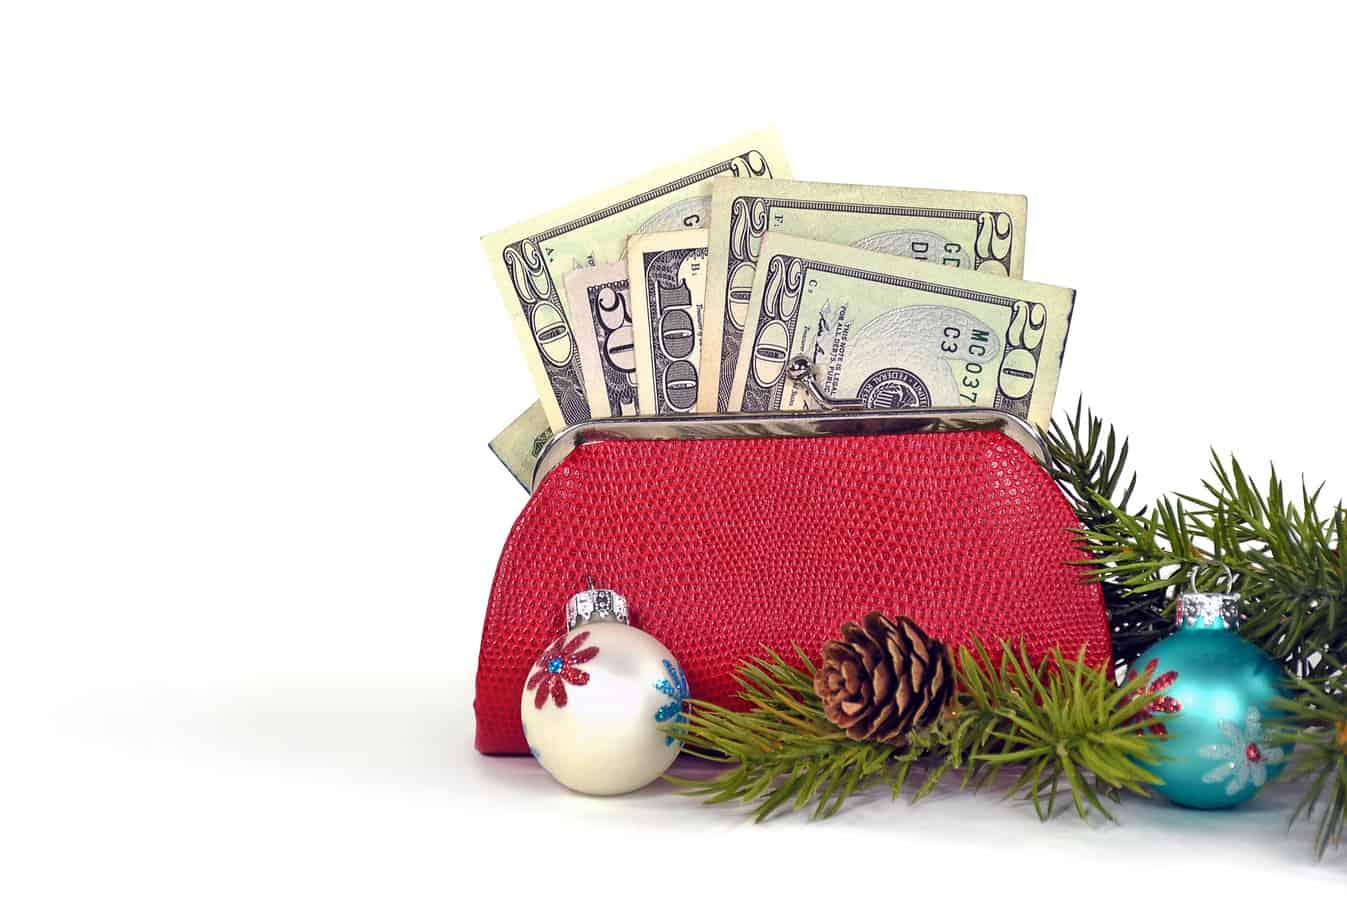 How To Make Quick Cash For The Holidays Life And A Budget - how to make quick cash for the holidays